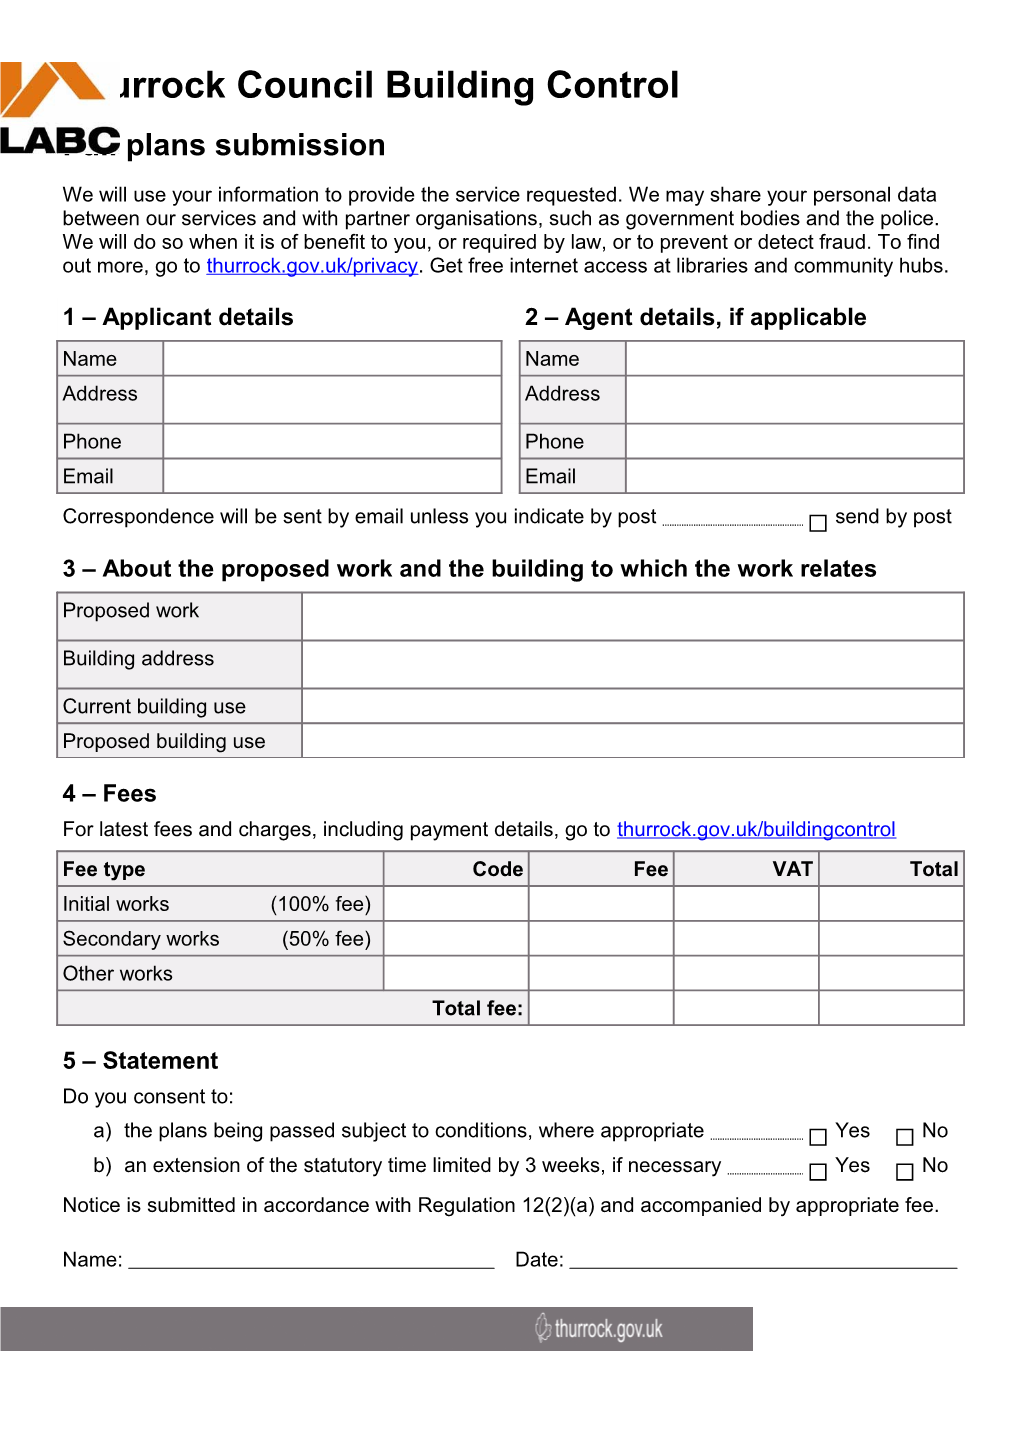 Thurrock Council - Building Control Full Plans Submission